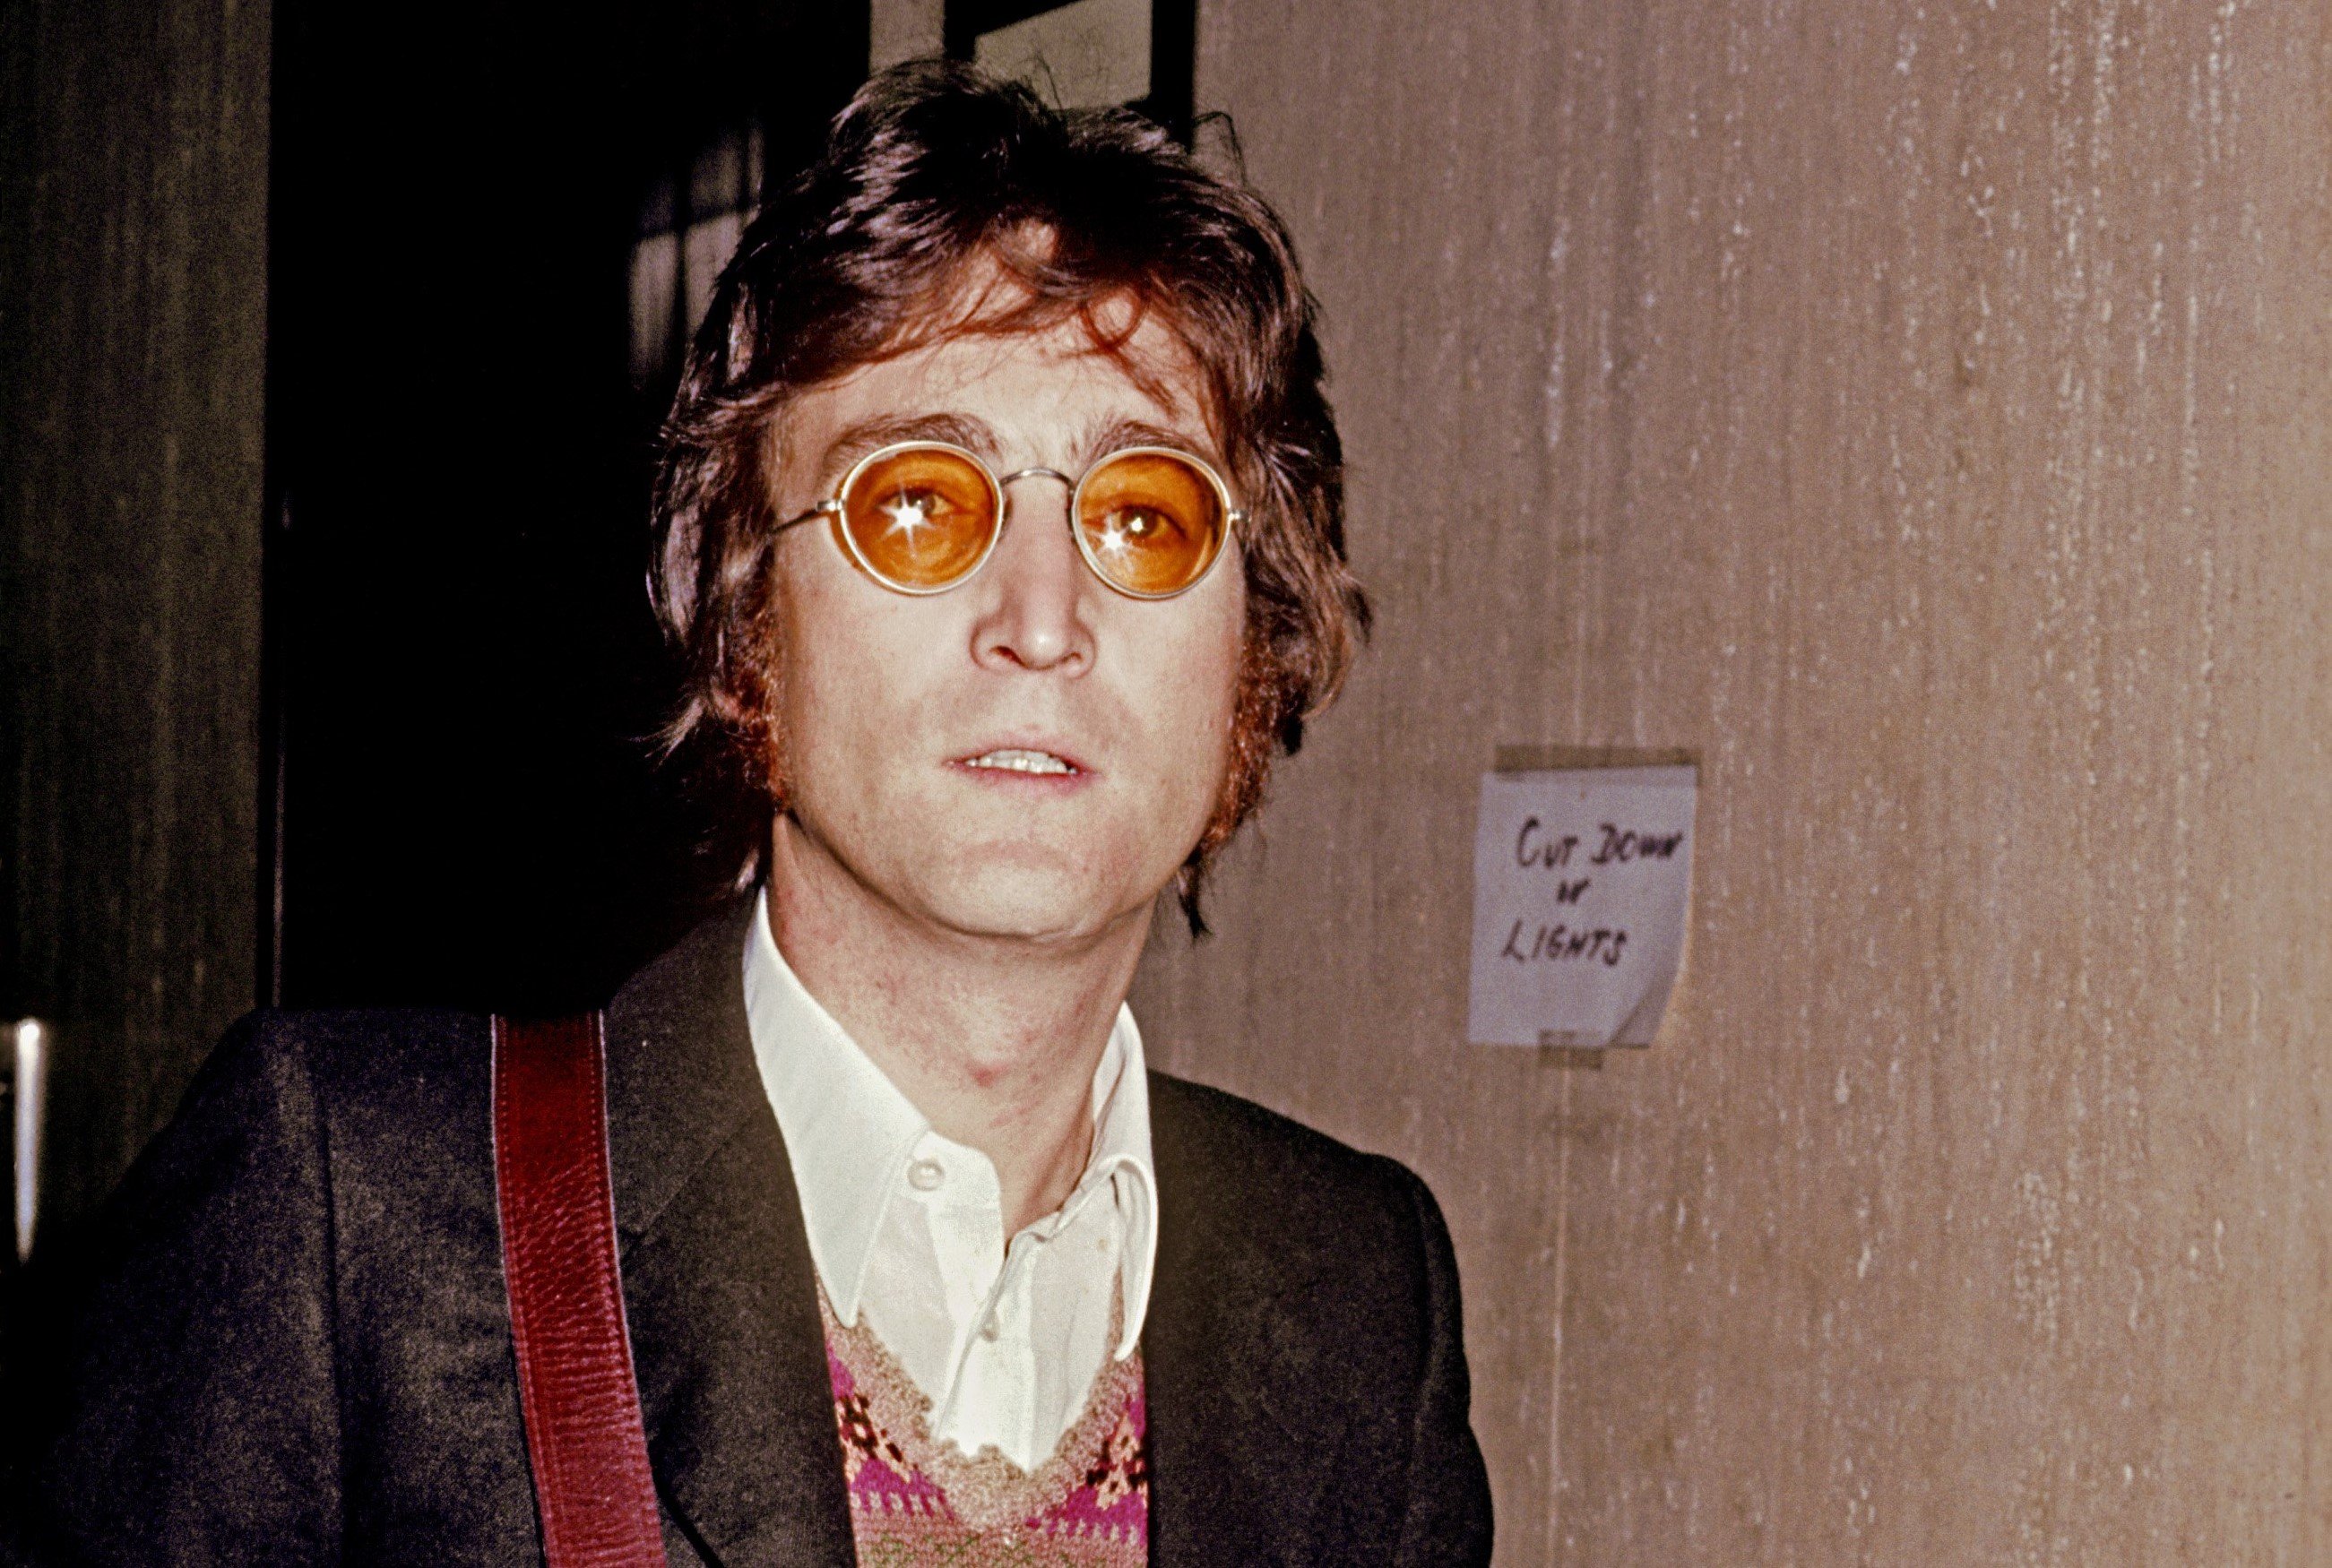 John Lennon wears sunglasses and carries a bag over his shoulder.